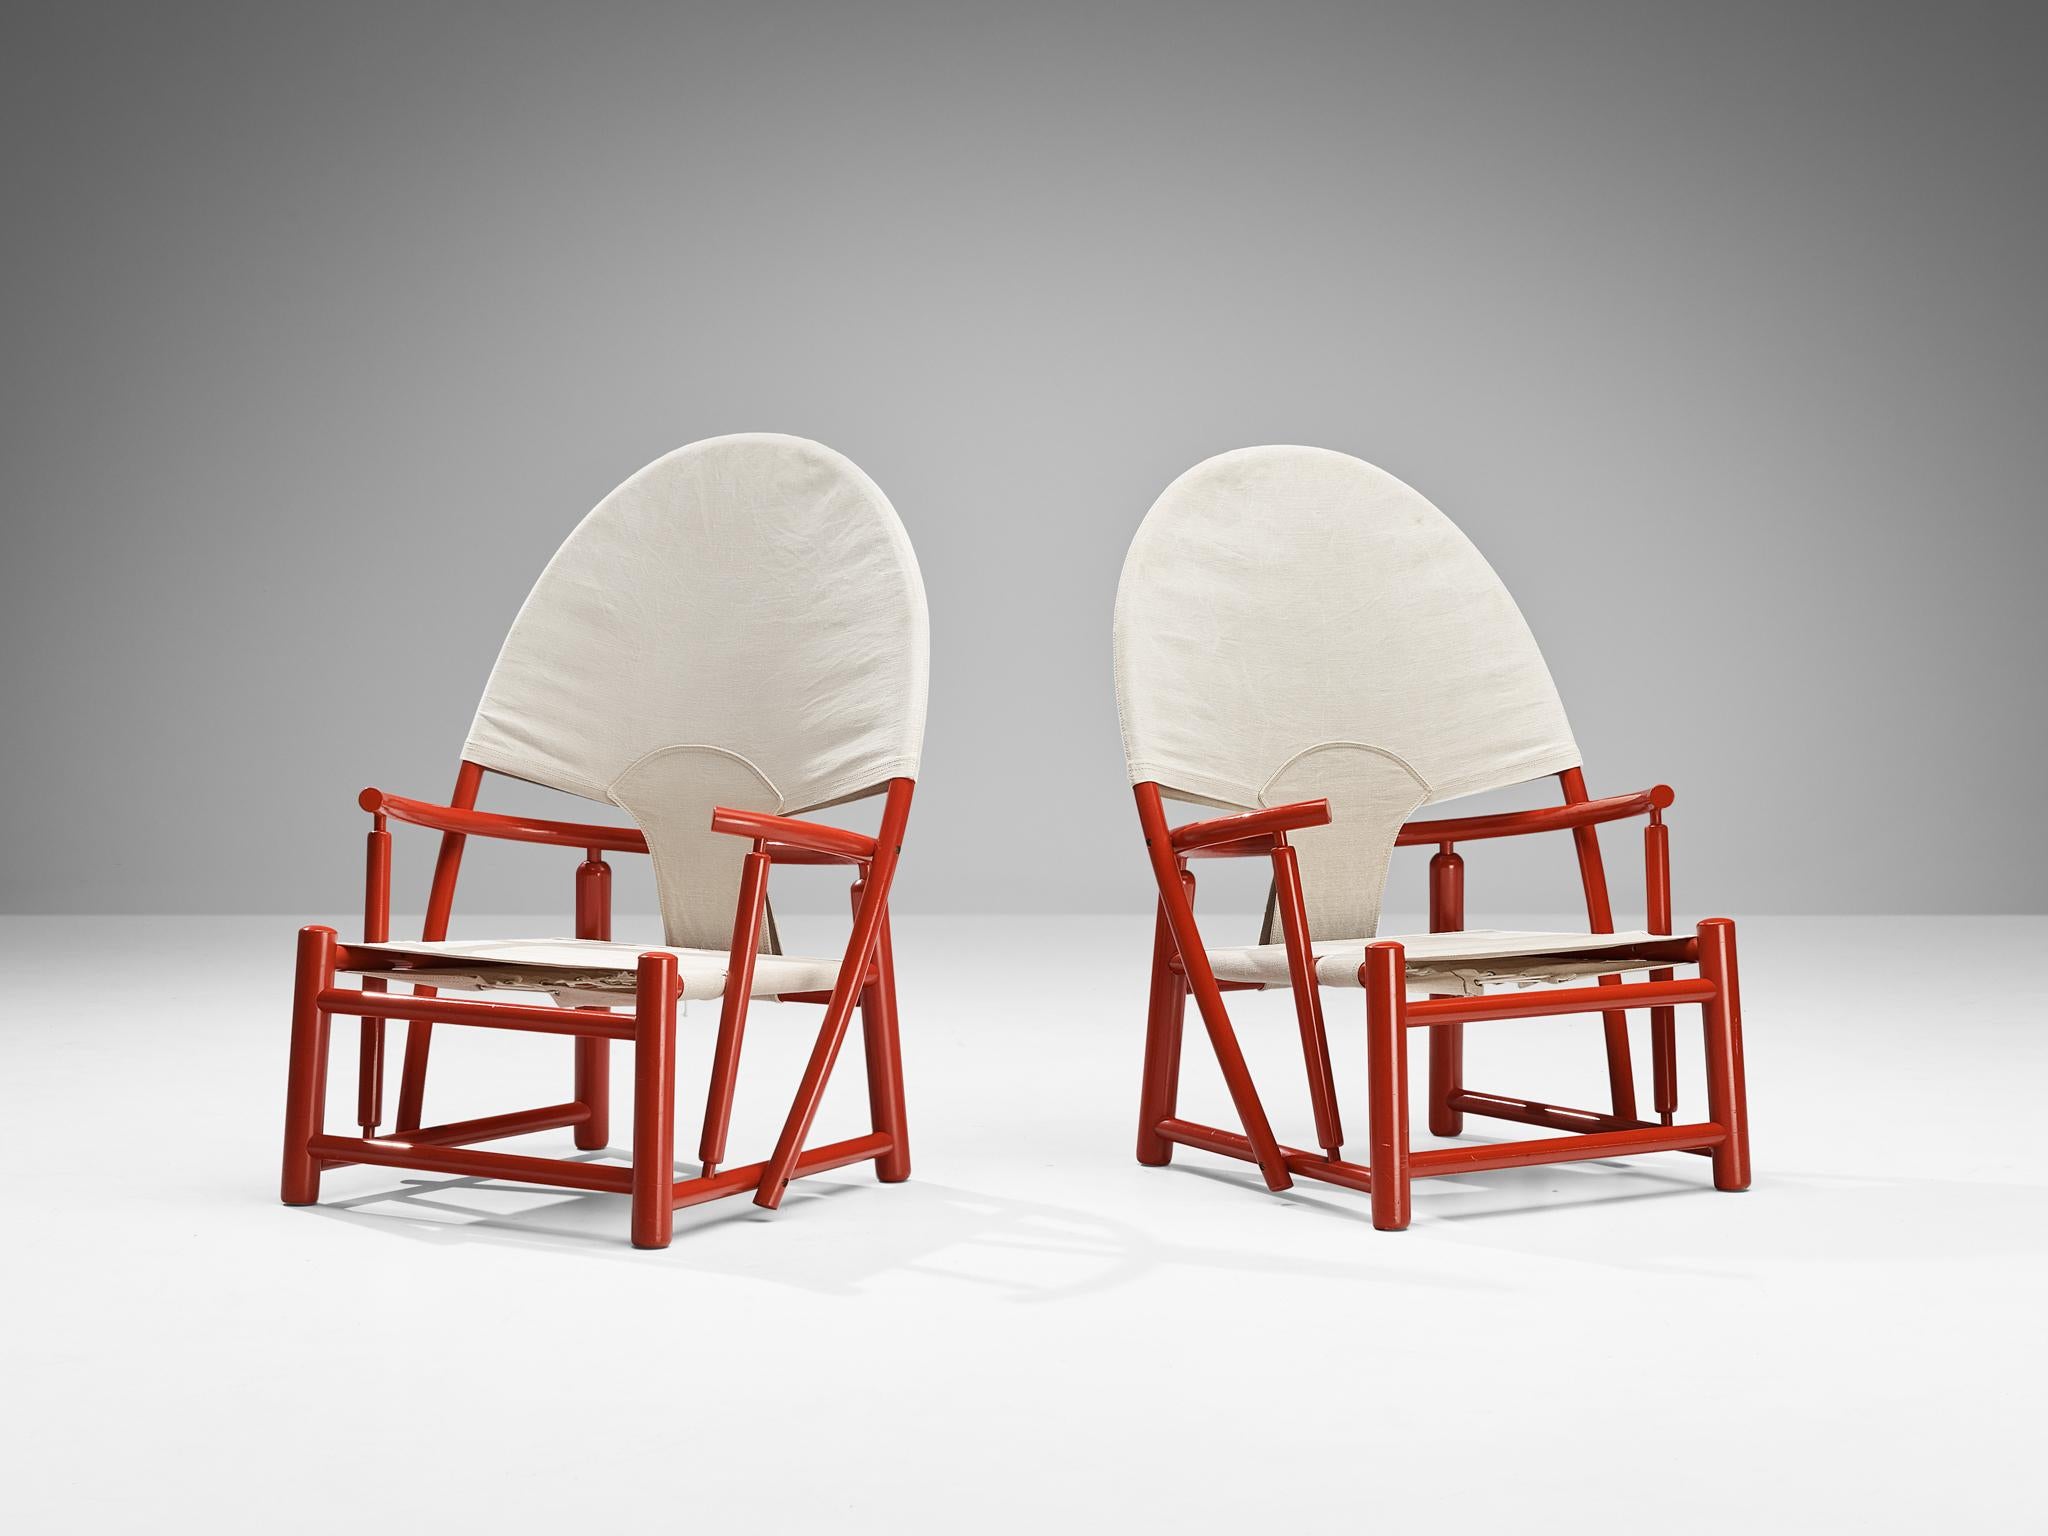 Late 20th Century Werther Toffoloni & Piero Palange Pair of ‘Hoop’ Red Chairs in Canvas  For Sale